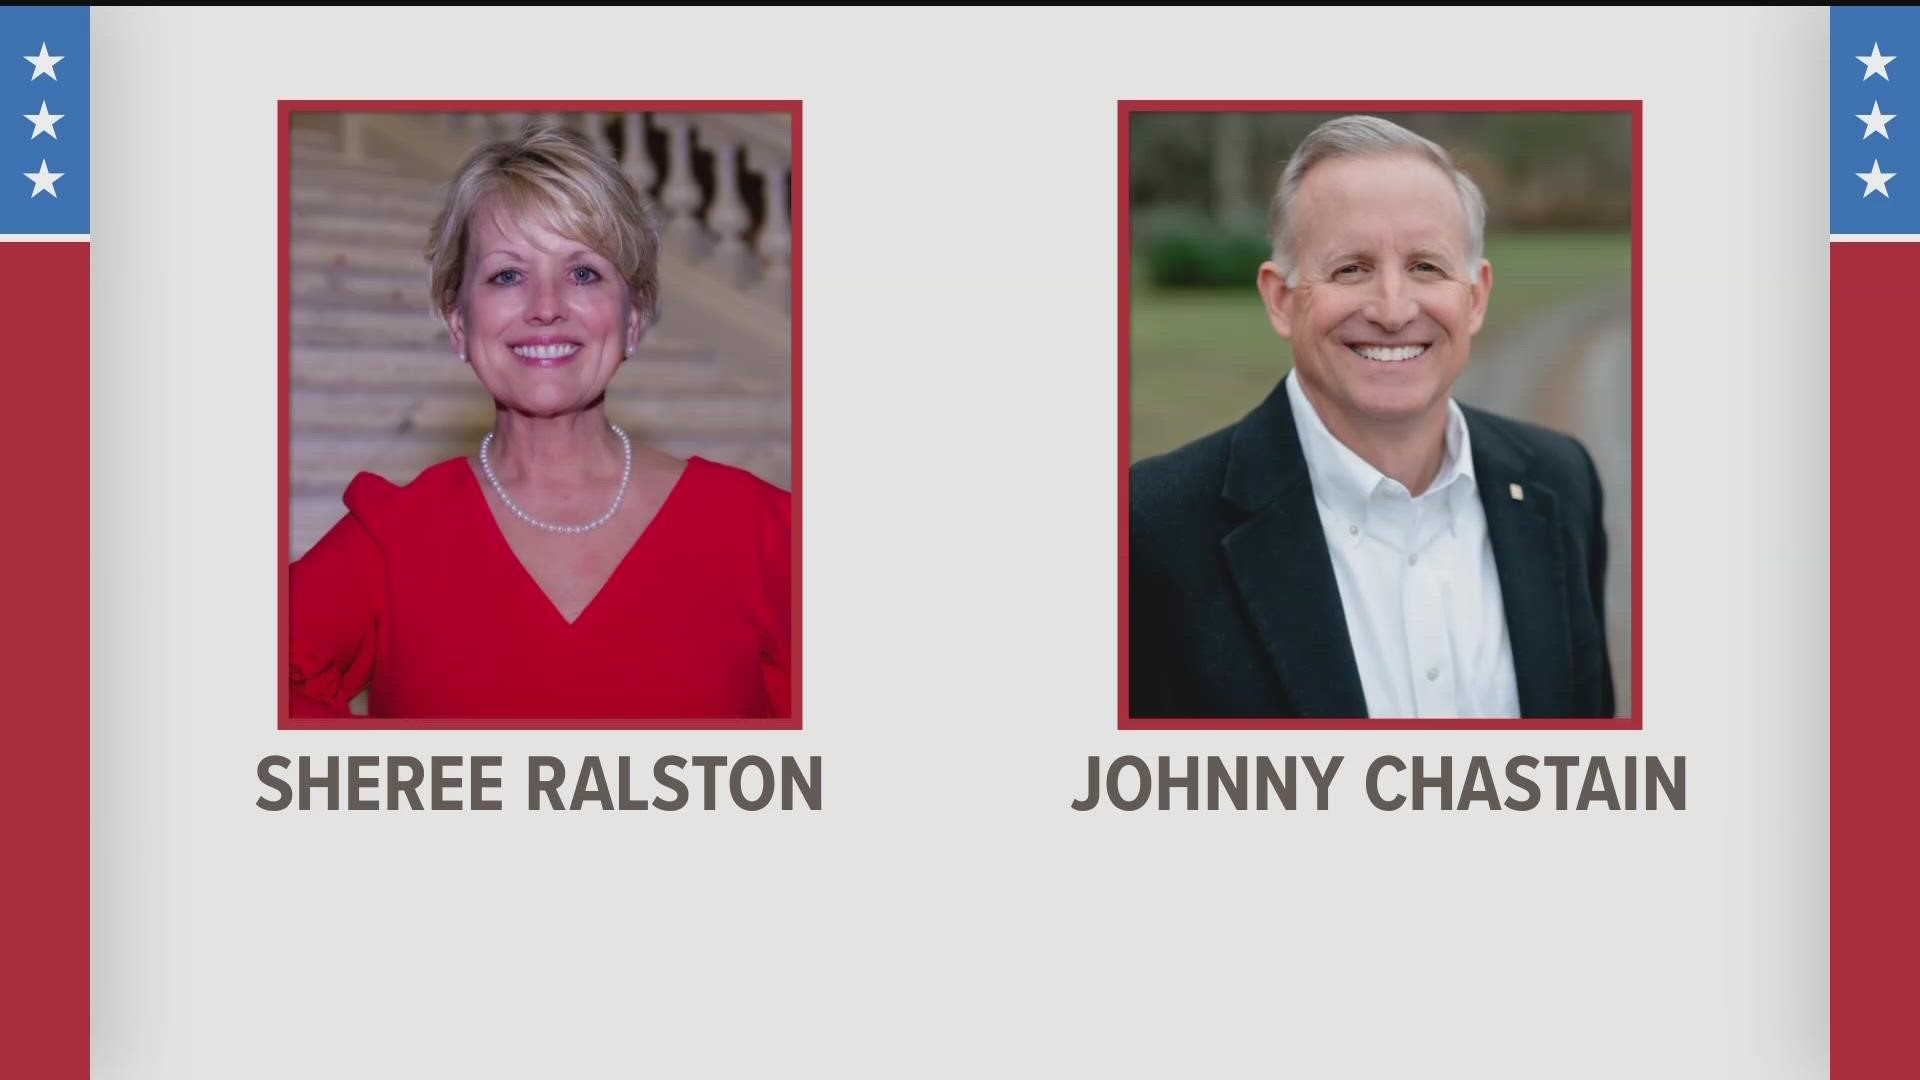 A north Georgia banker defeated the widow of late House Speaker David Ralston to win Ralston's old House seat in a Republican runoff Tuesday.